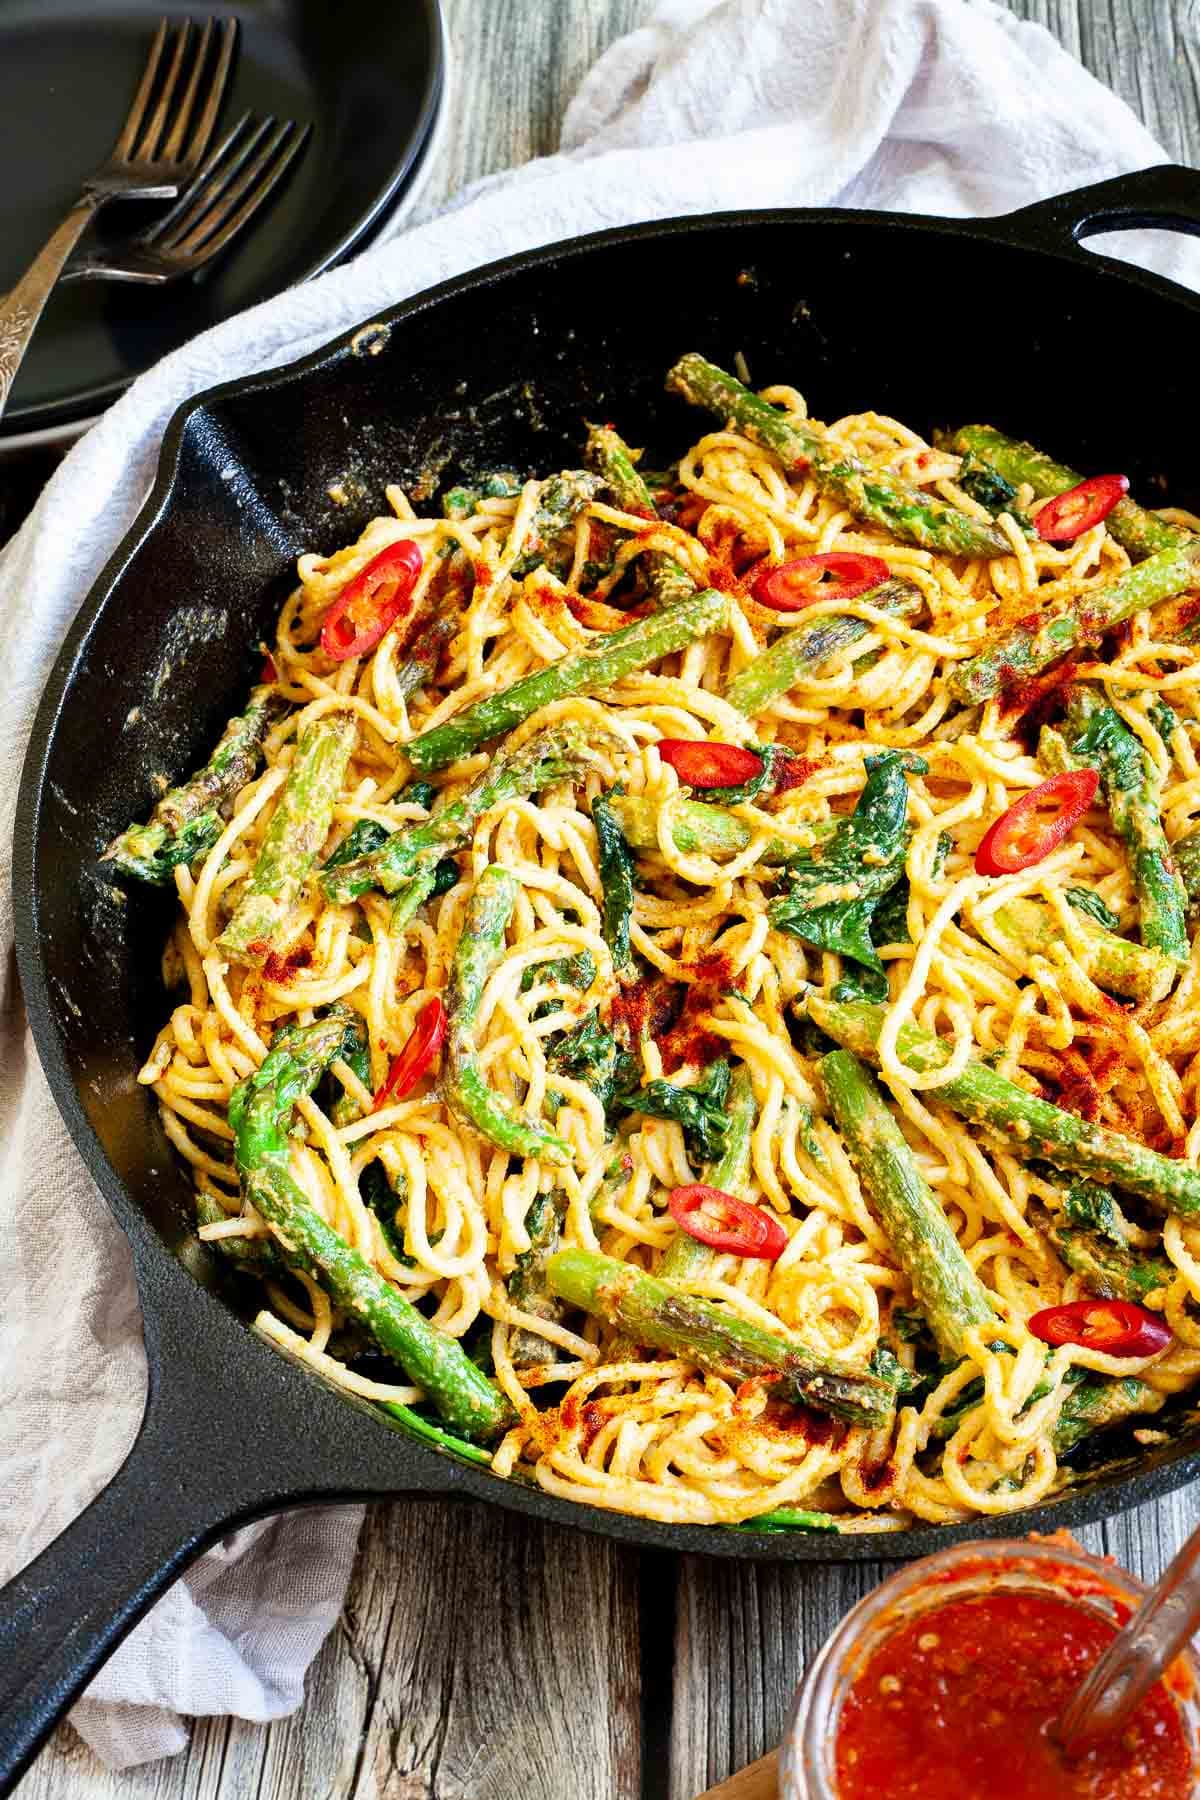 Black cast iron skillet with spaghetti in creamy light brown sauce with asparagus, spinach and red pepper slices. With harissa sauce in glass jar next to it